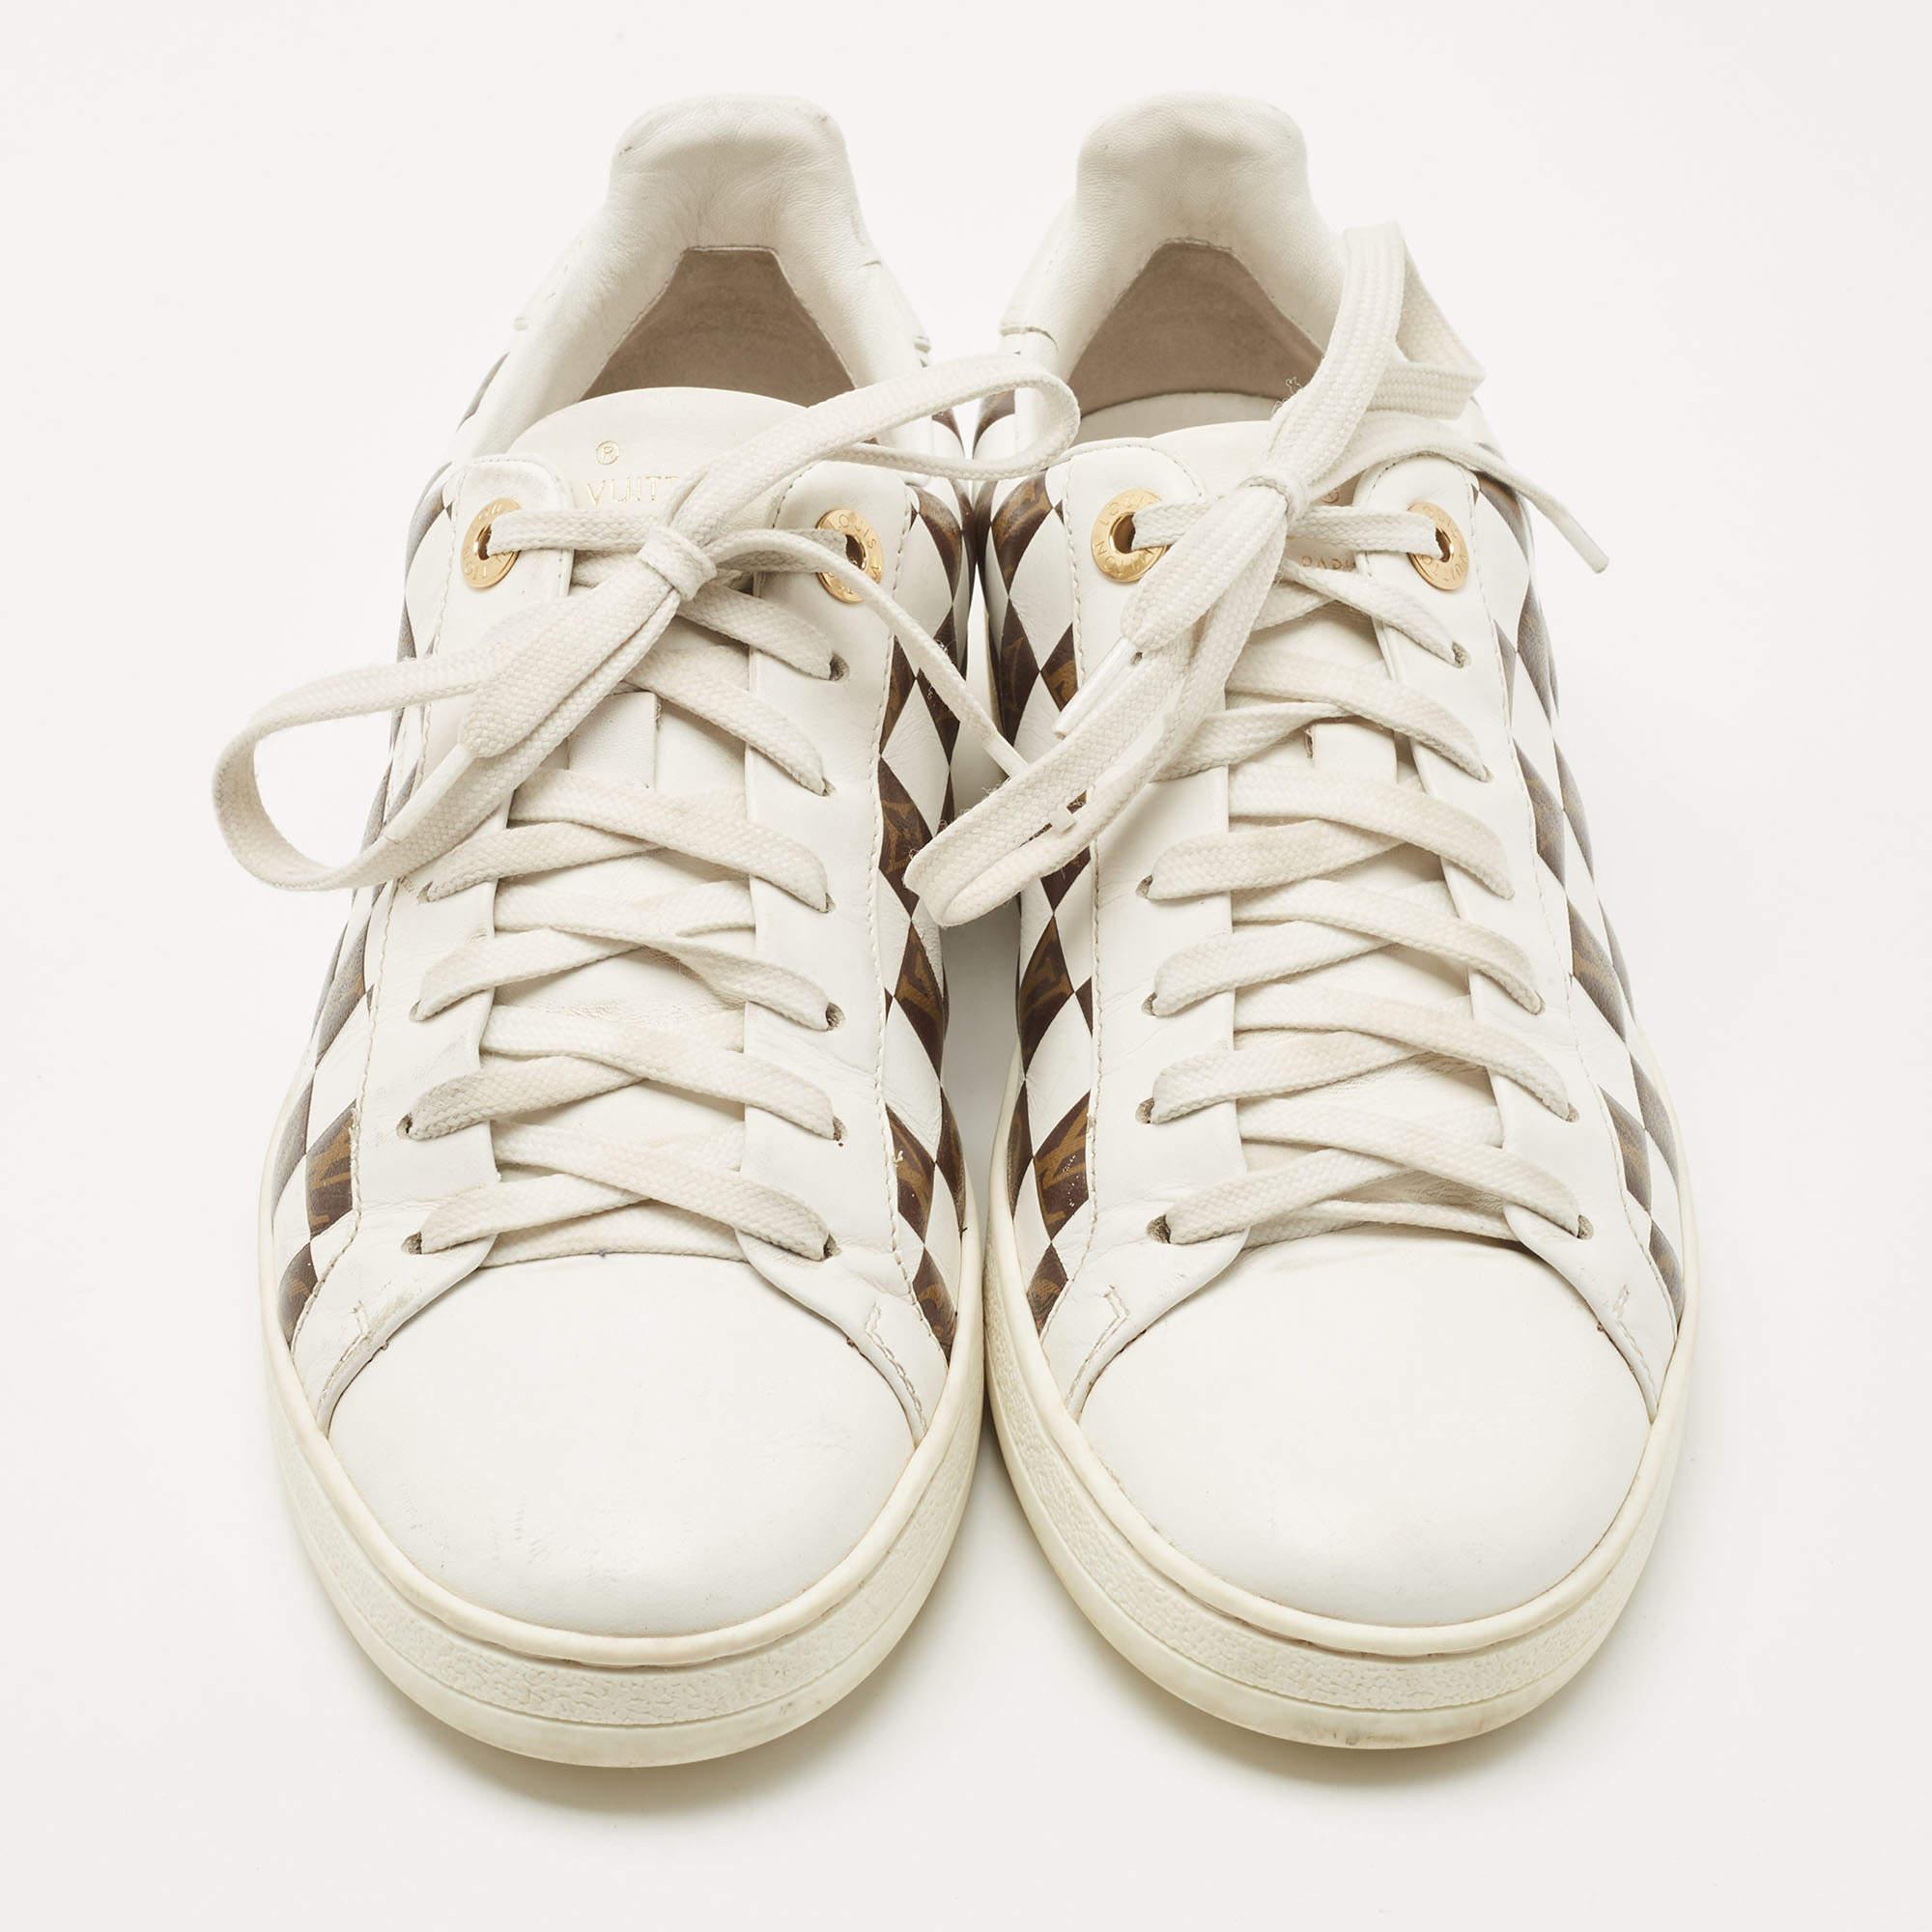 These Louis Vuitton sneakers are the ultimate step-up to bring style and attitude to your look. They are crafted from leather and coated canvas and have a lovely brown and white color combination. They have lace-ups as well as velcro closures and